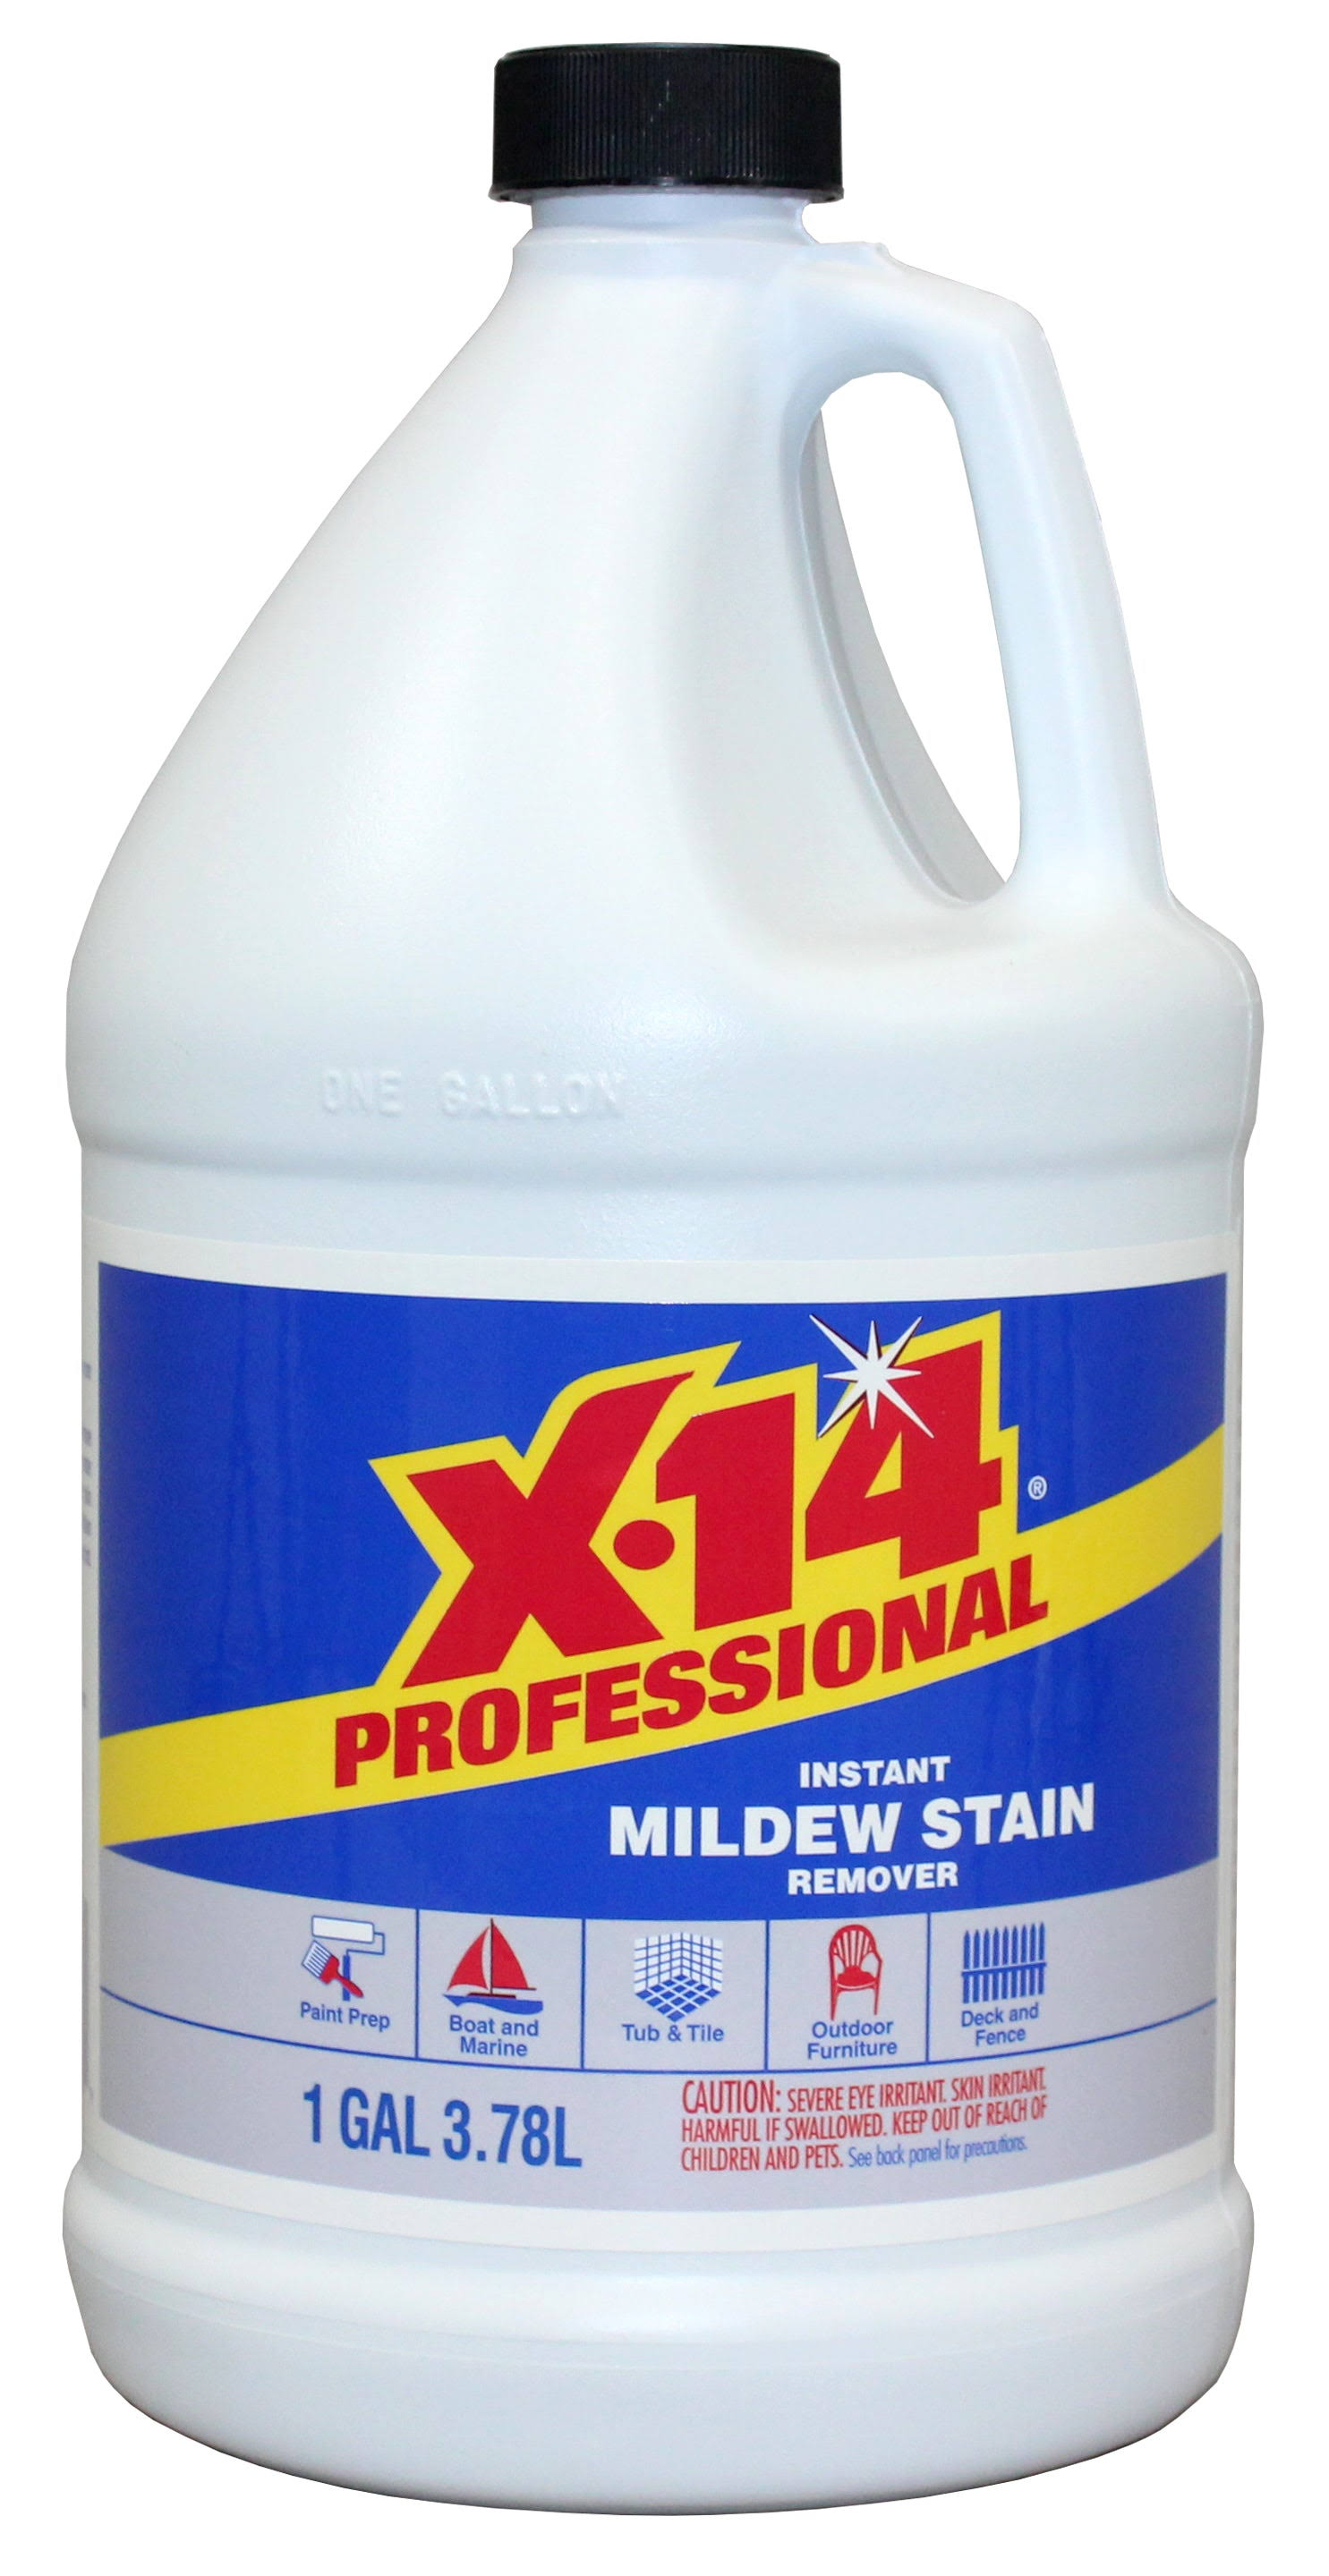 X-14 Wildew Stain Remover